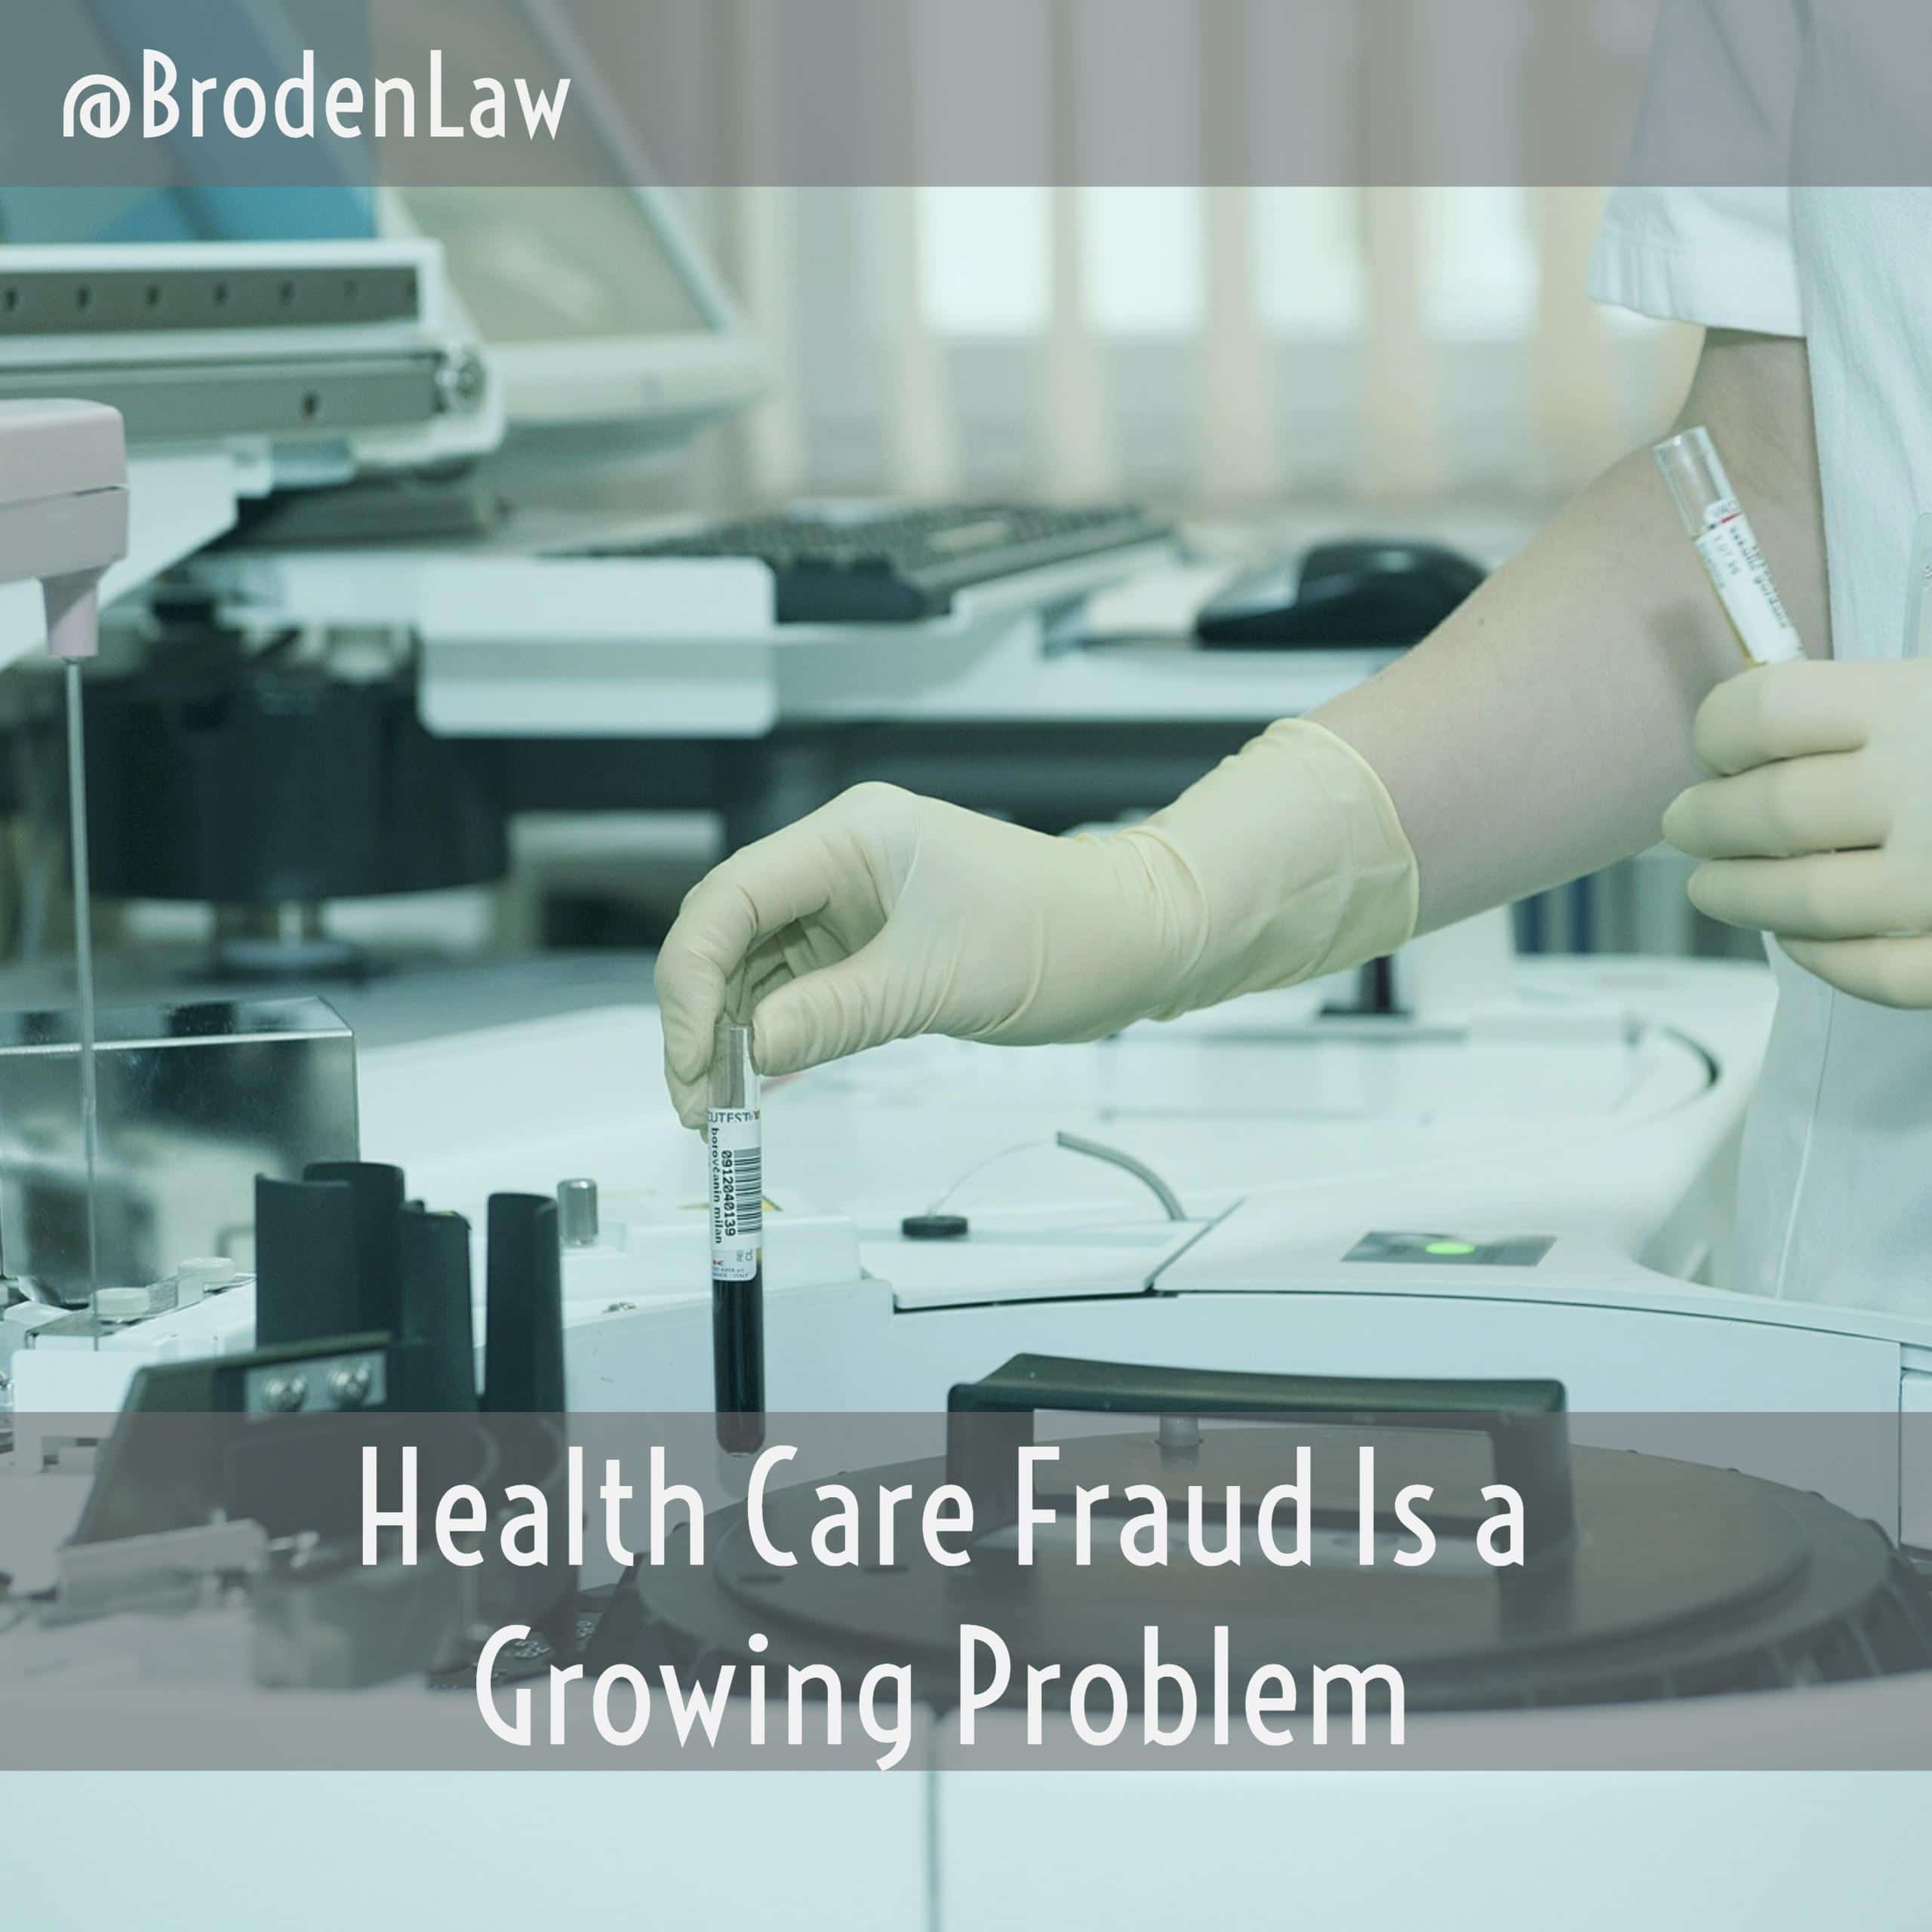 Health Care Fraud Is a Growing Problem